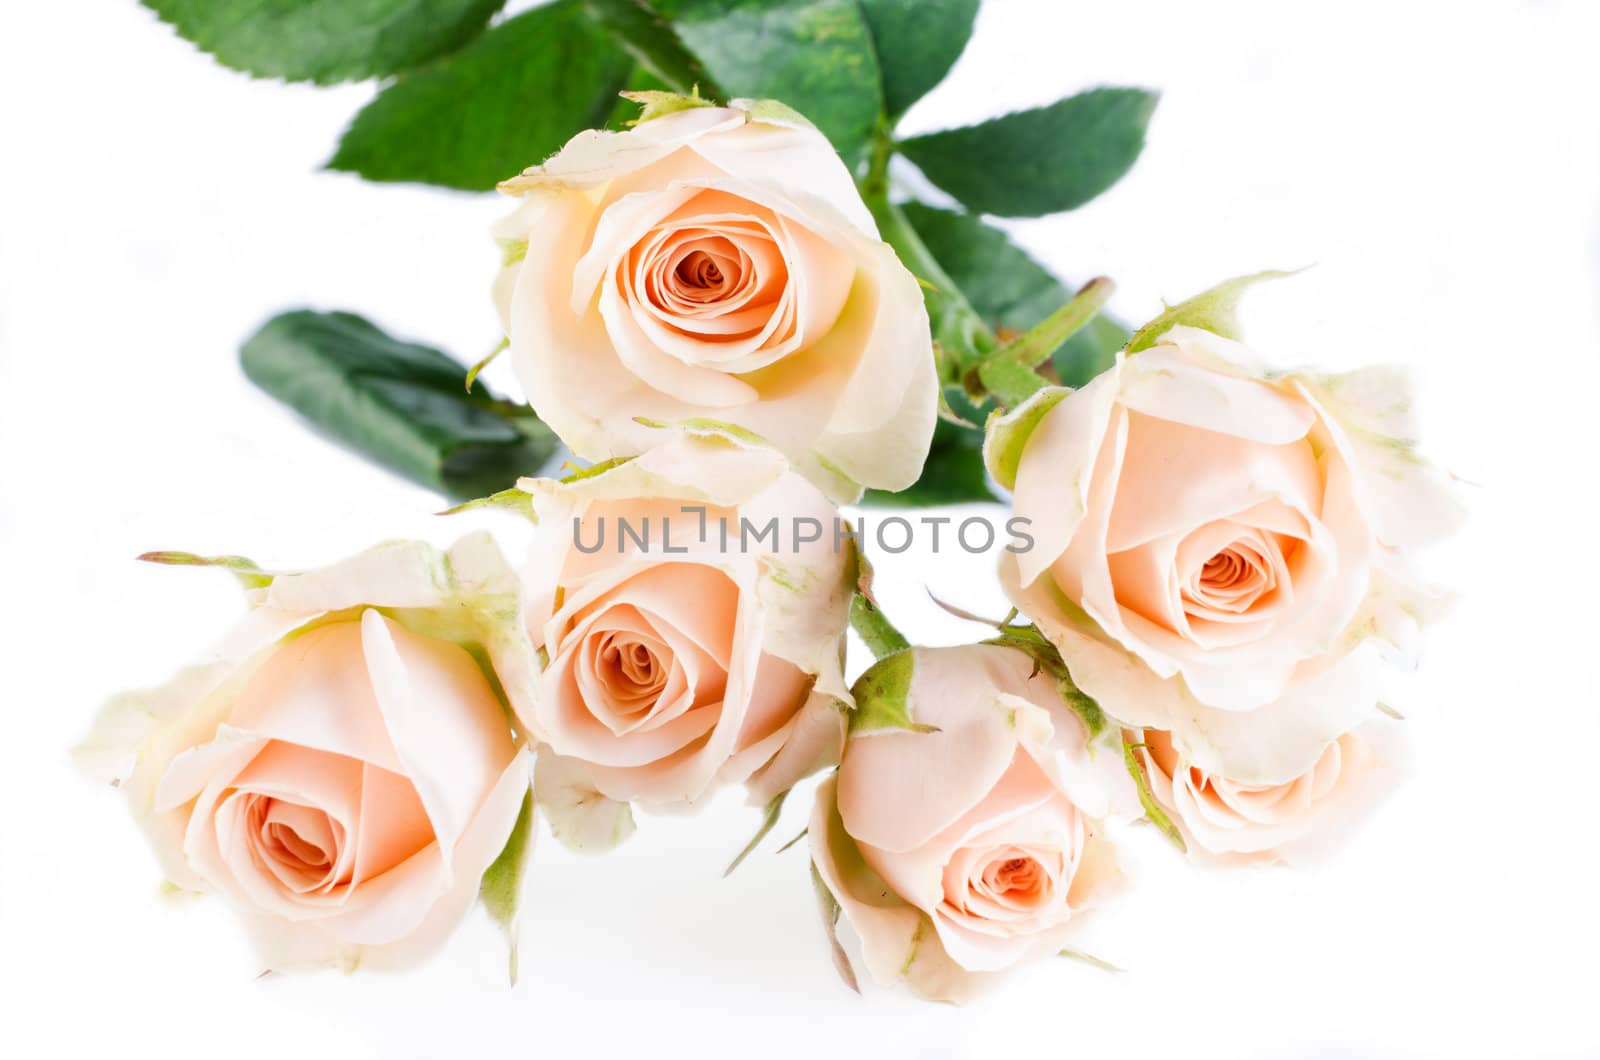 Beautyful roses bouquet on white background